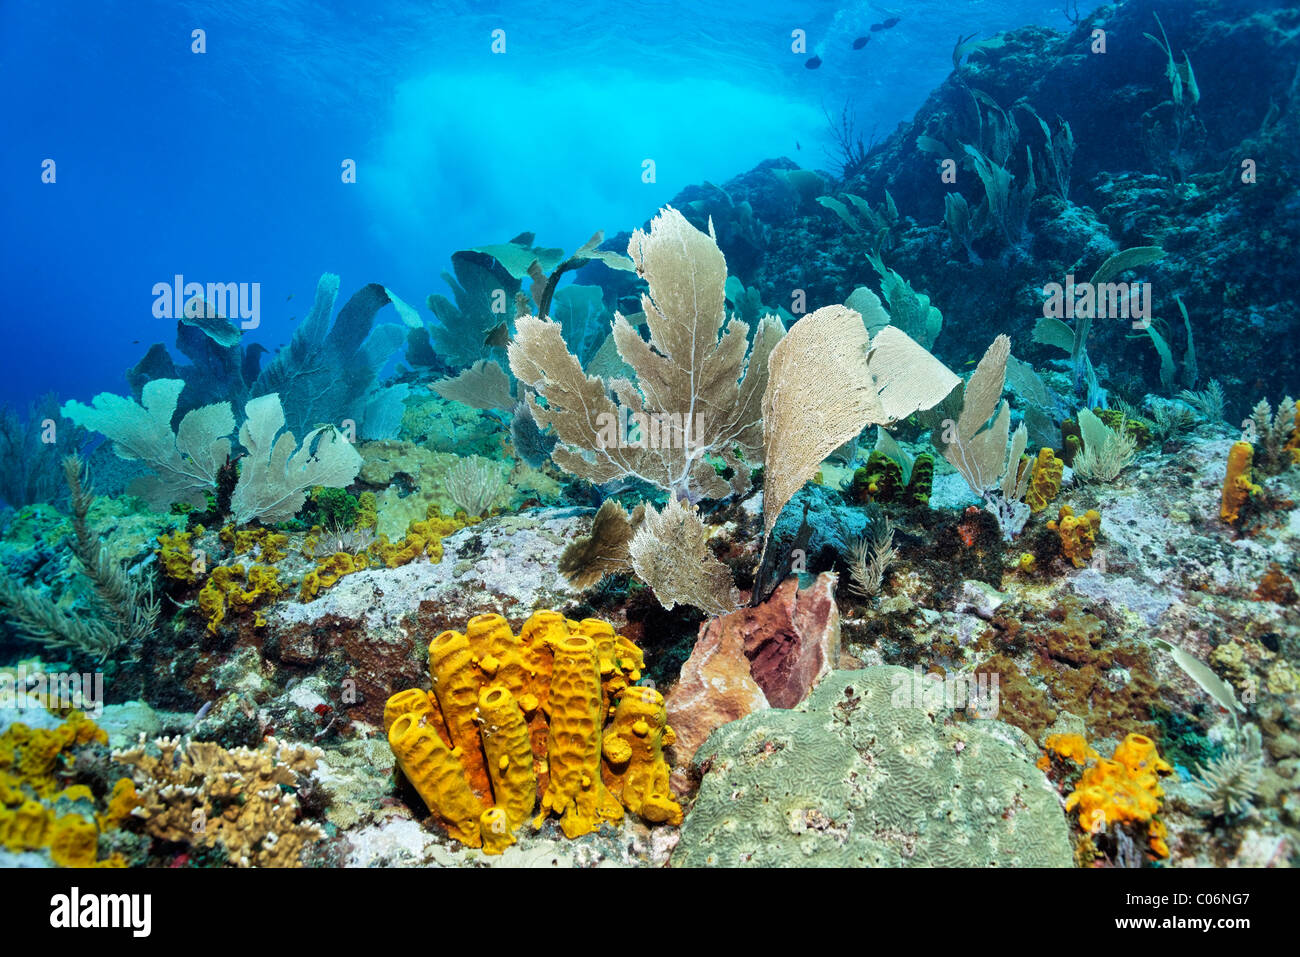 Coral reef in strong waves and currents, Venus sea fan (Gorgonia flabellum), Yello tube sponge, (Aplysina fistularis) Little Stock Photo